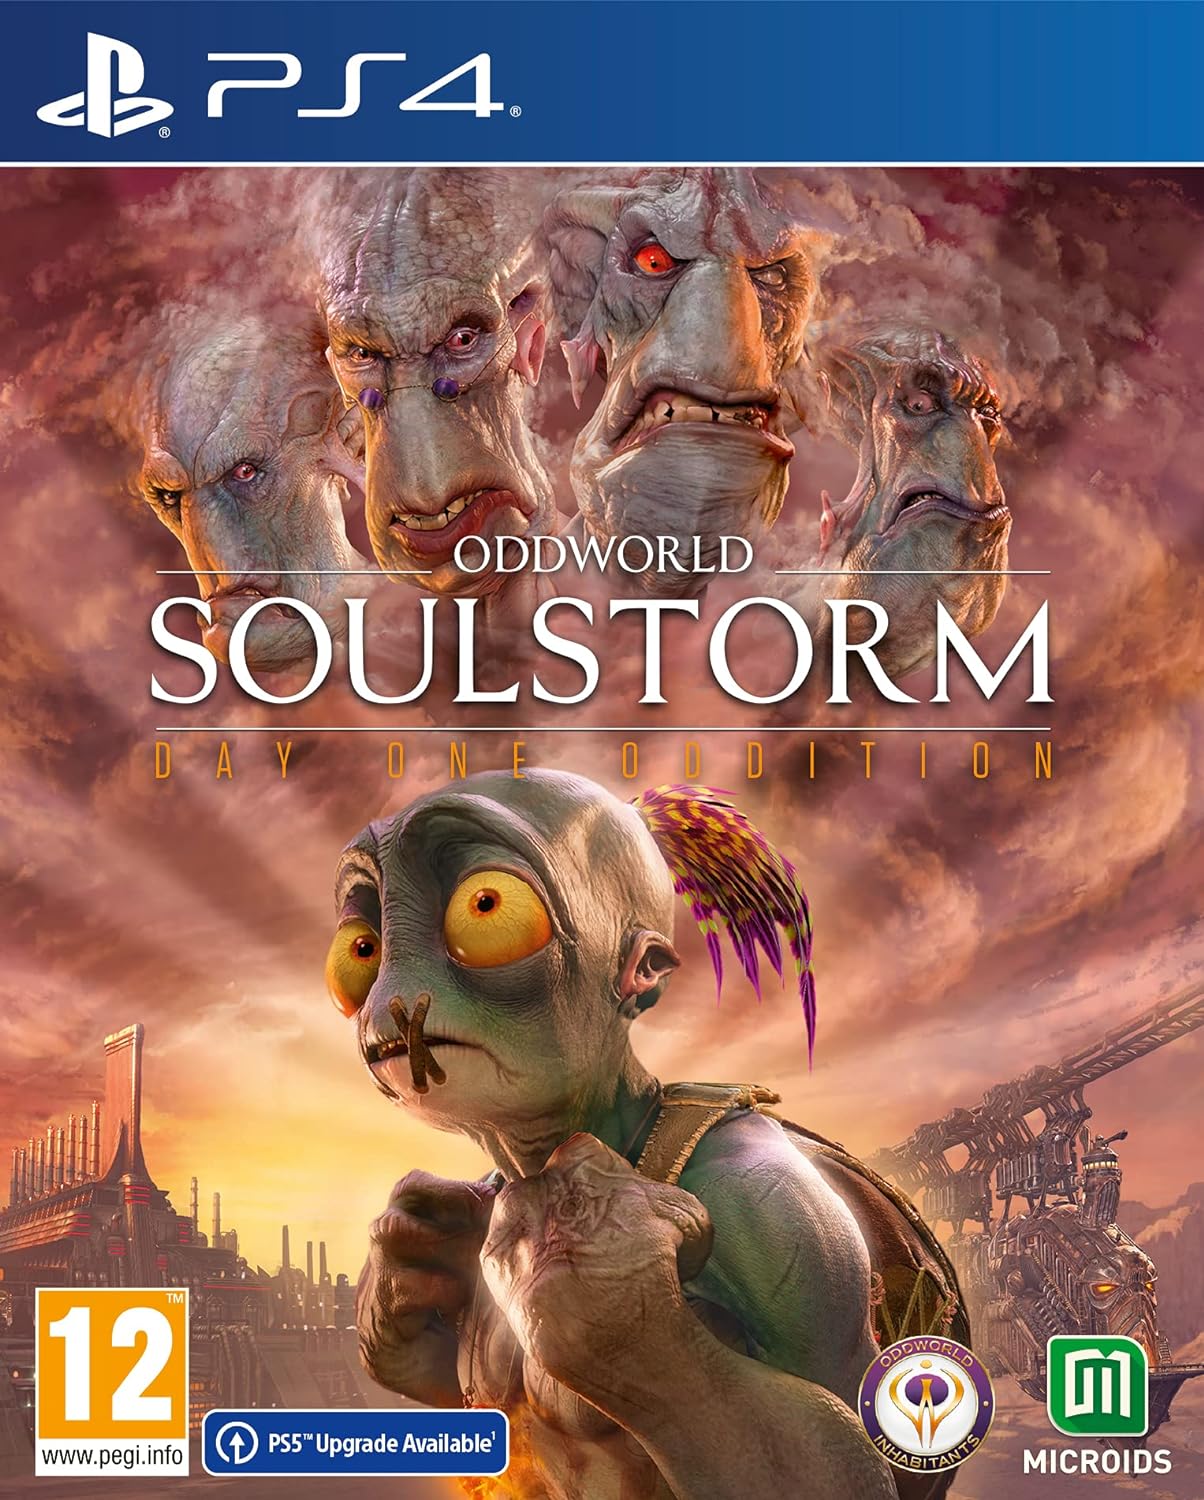 Oddworld Soulstrom Day One Edition - PS4/PS5 Upgradeable